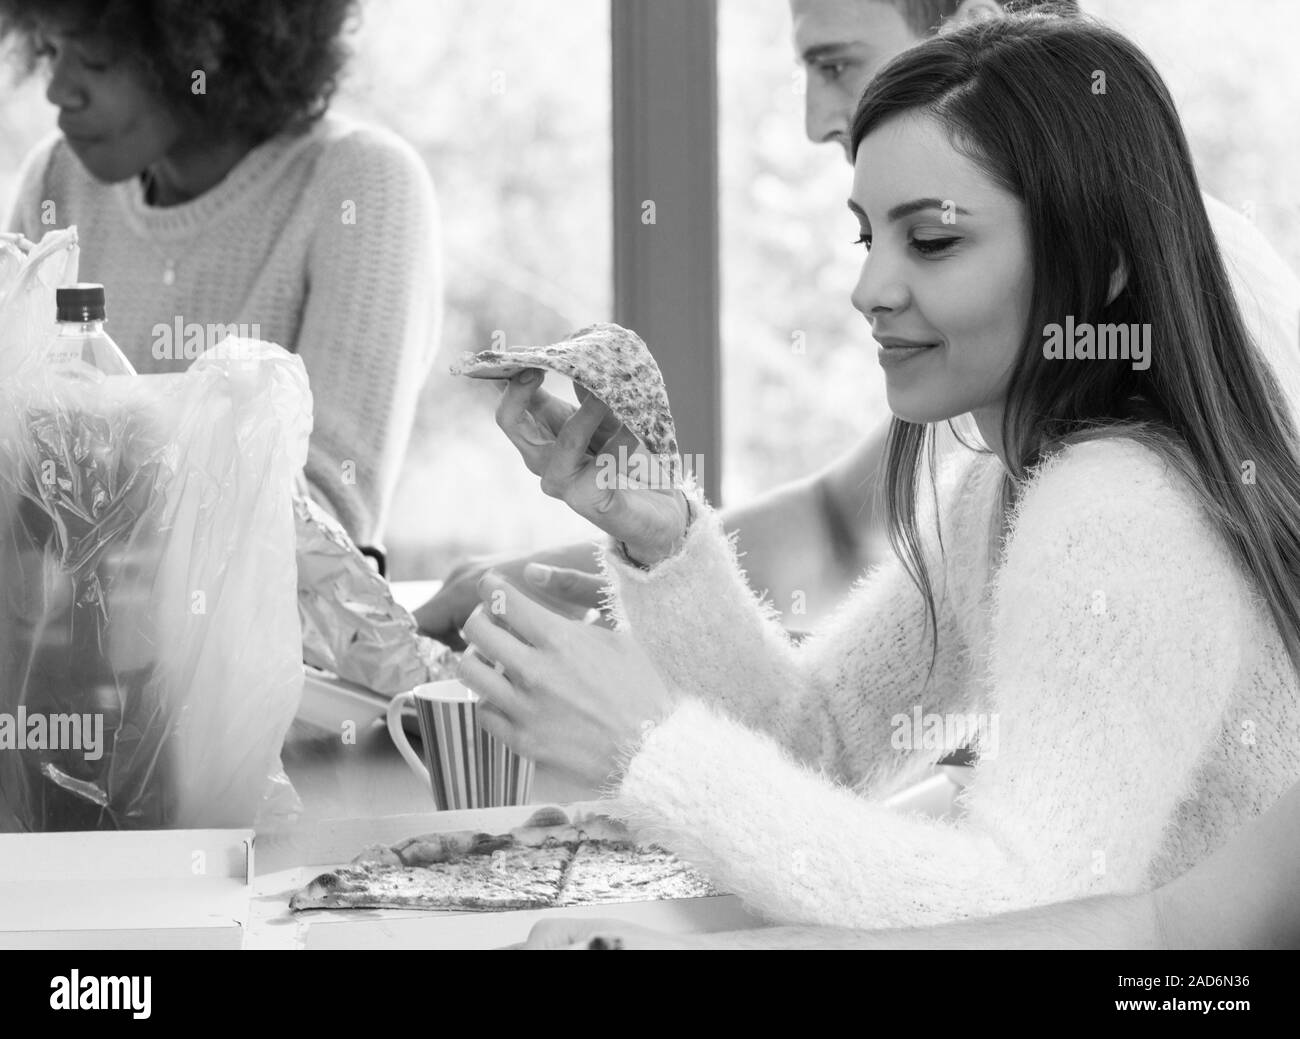 Young girl eating pizza Stock Photo